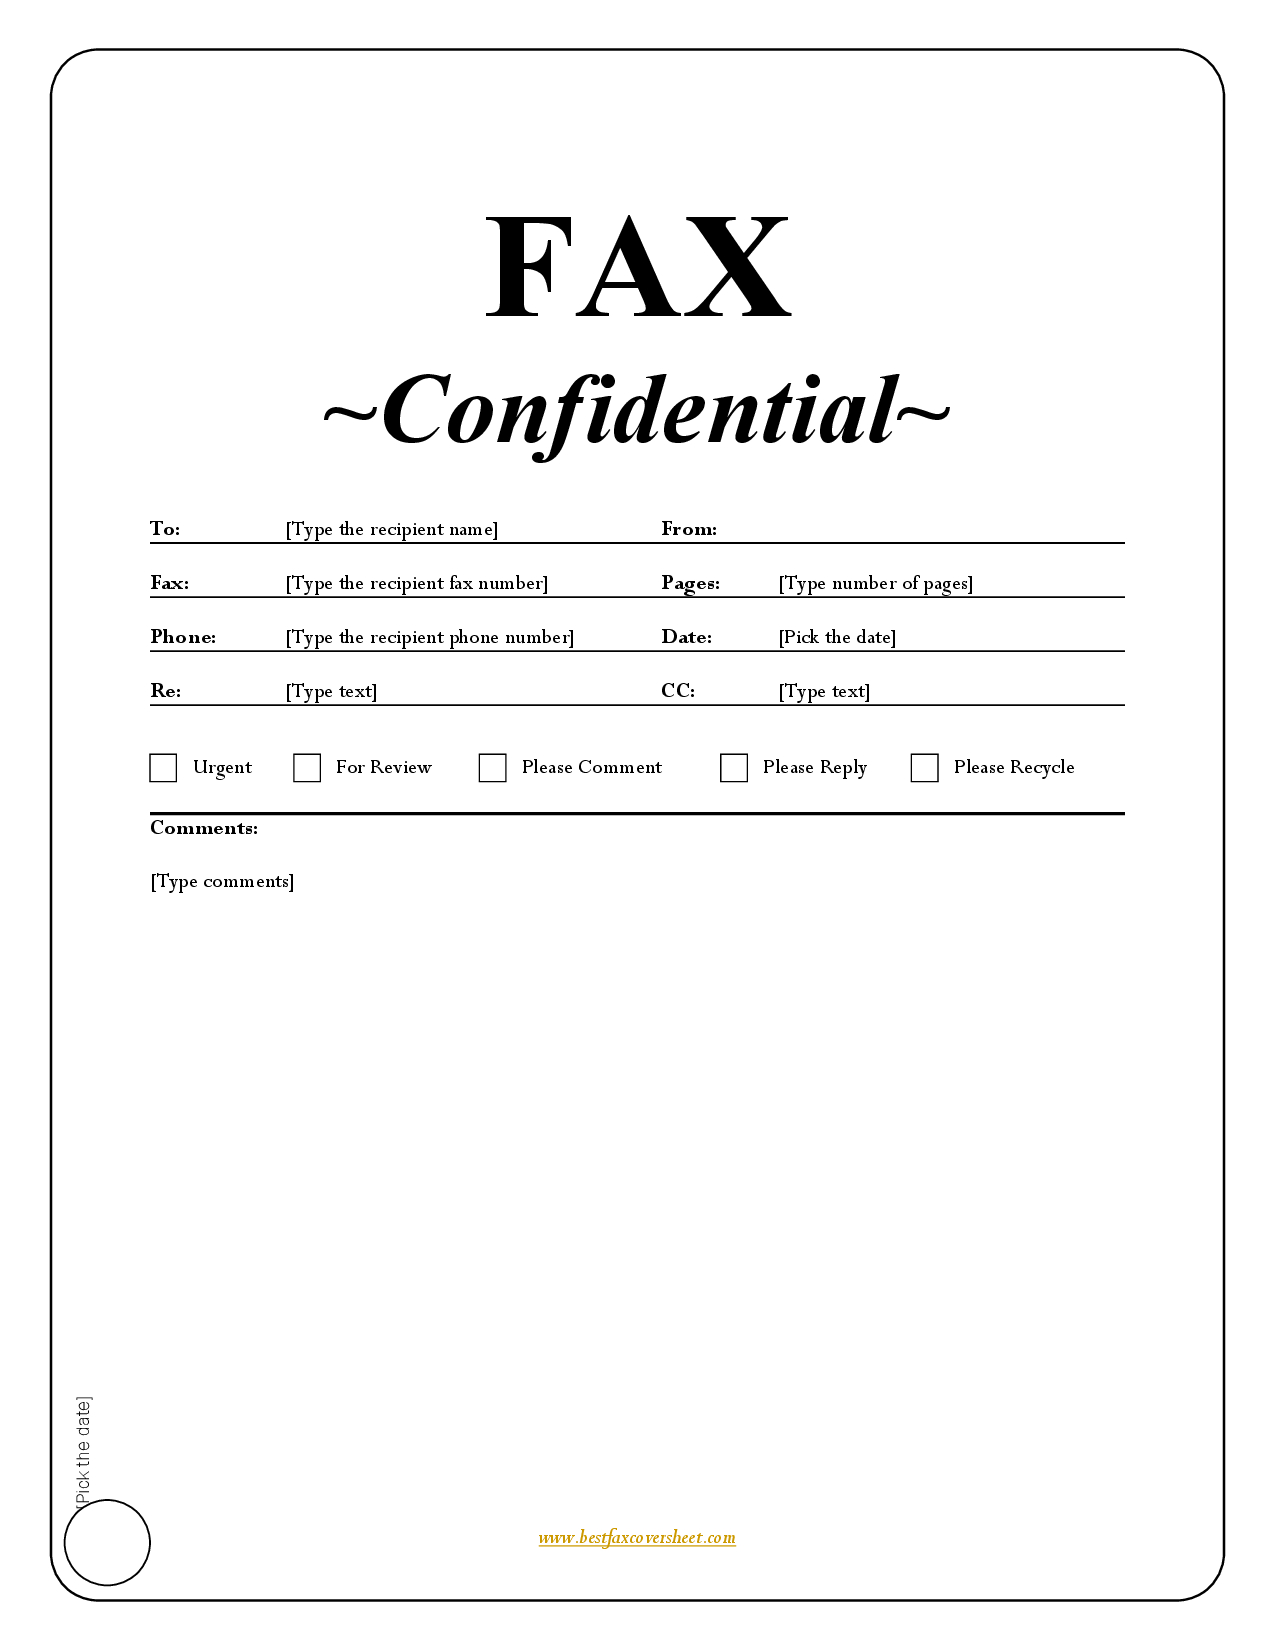 Confidential Fax Cover Sheet Microsoft Word - Free Printable Fax Cover Sheet